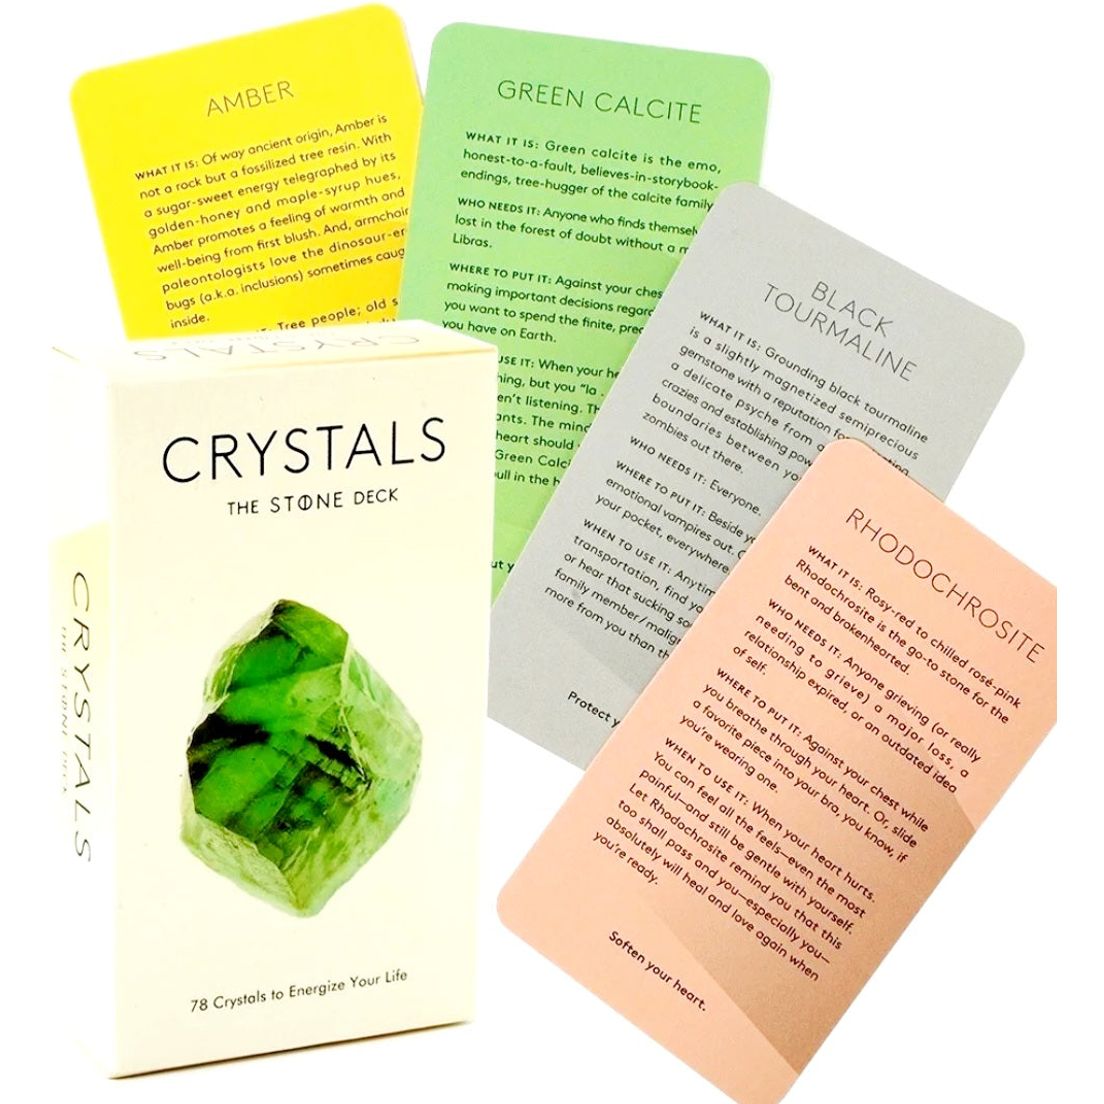 CRYSTALS THE STONE DECK